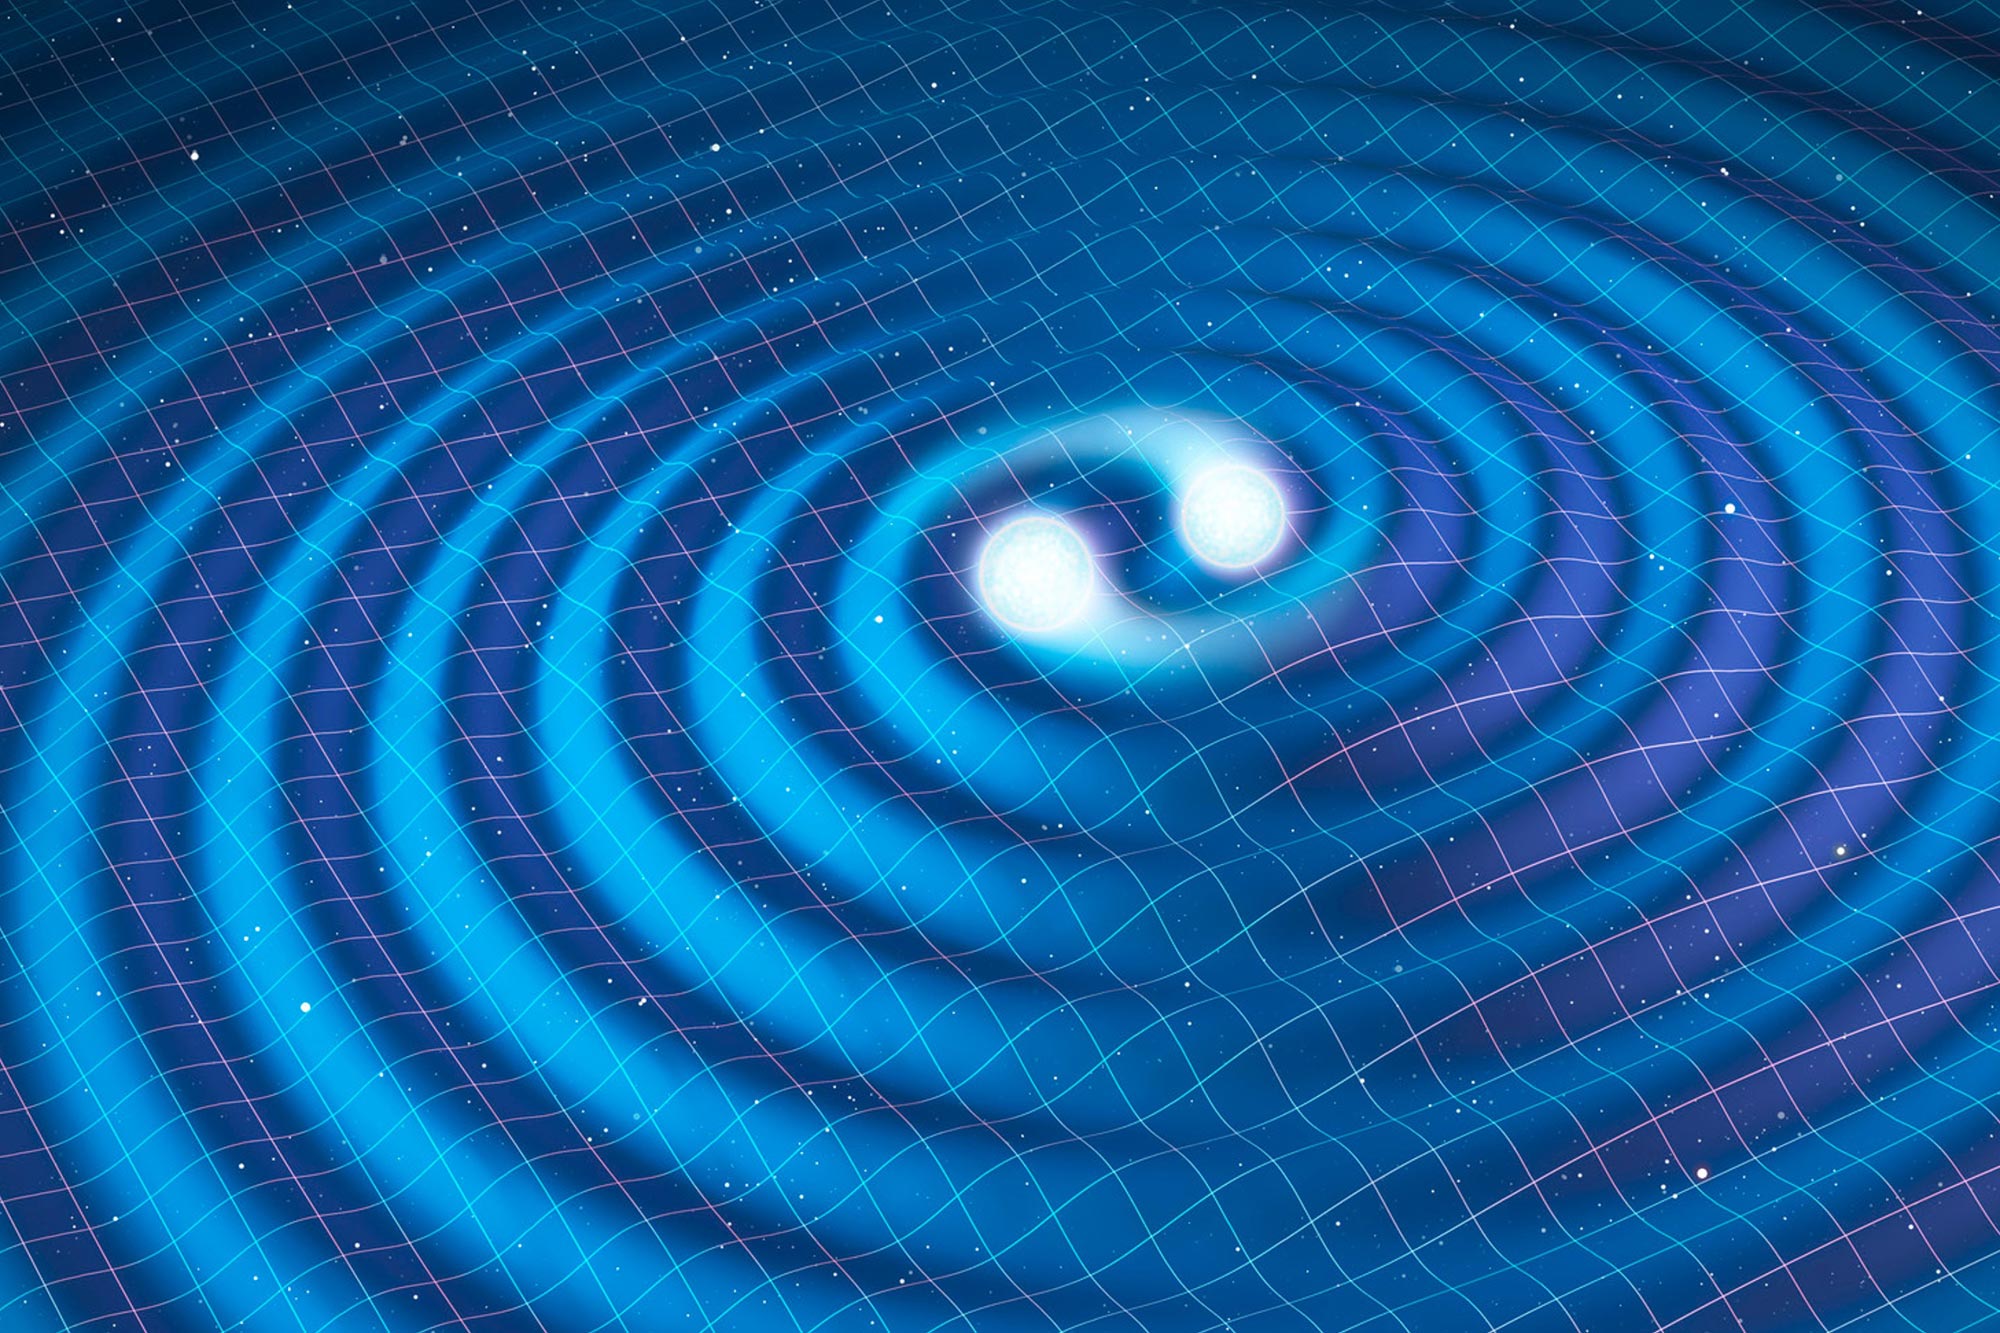 The concept of gravitational waves in astrophysics